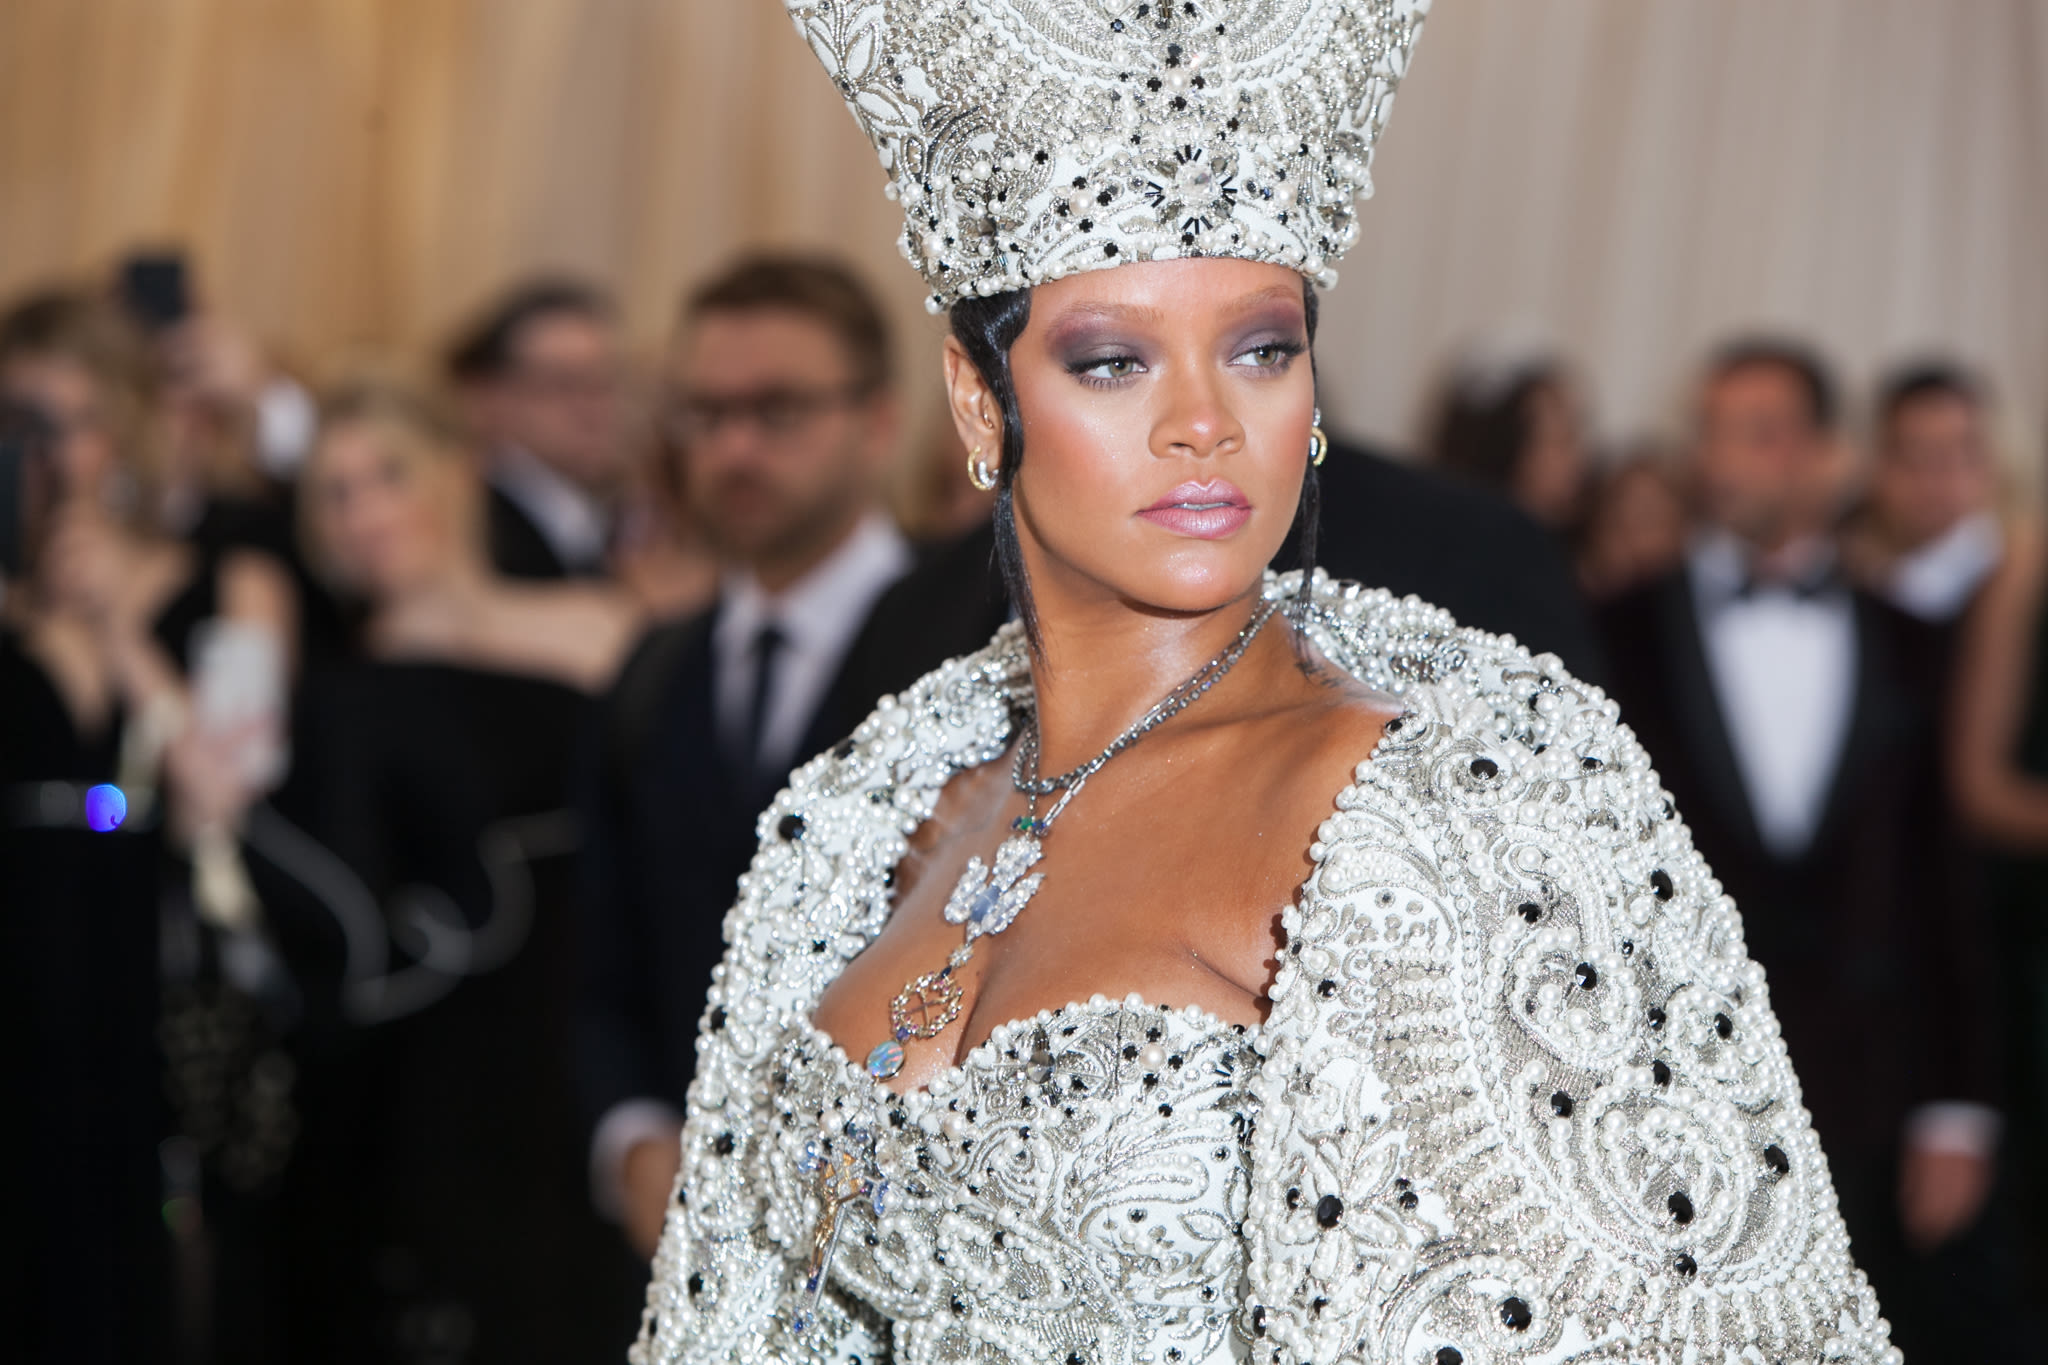 The Most Memorable Met Gala Red Carpet Looks of All Time